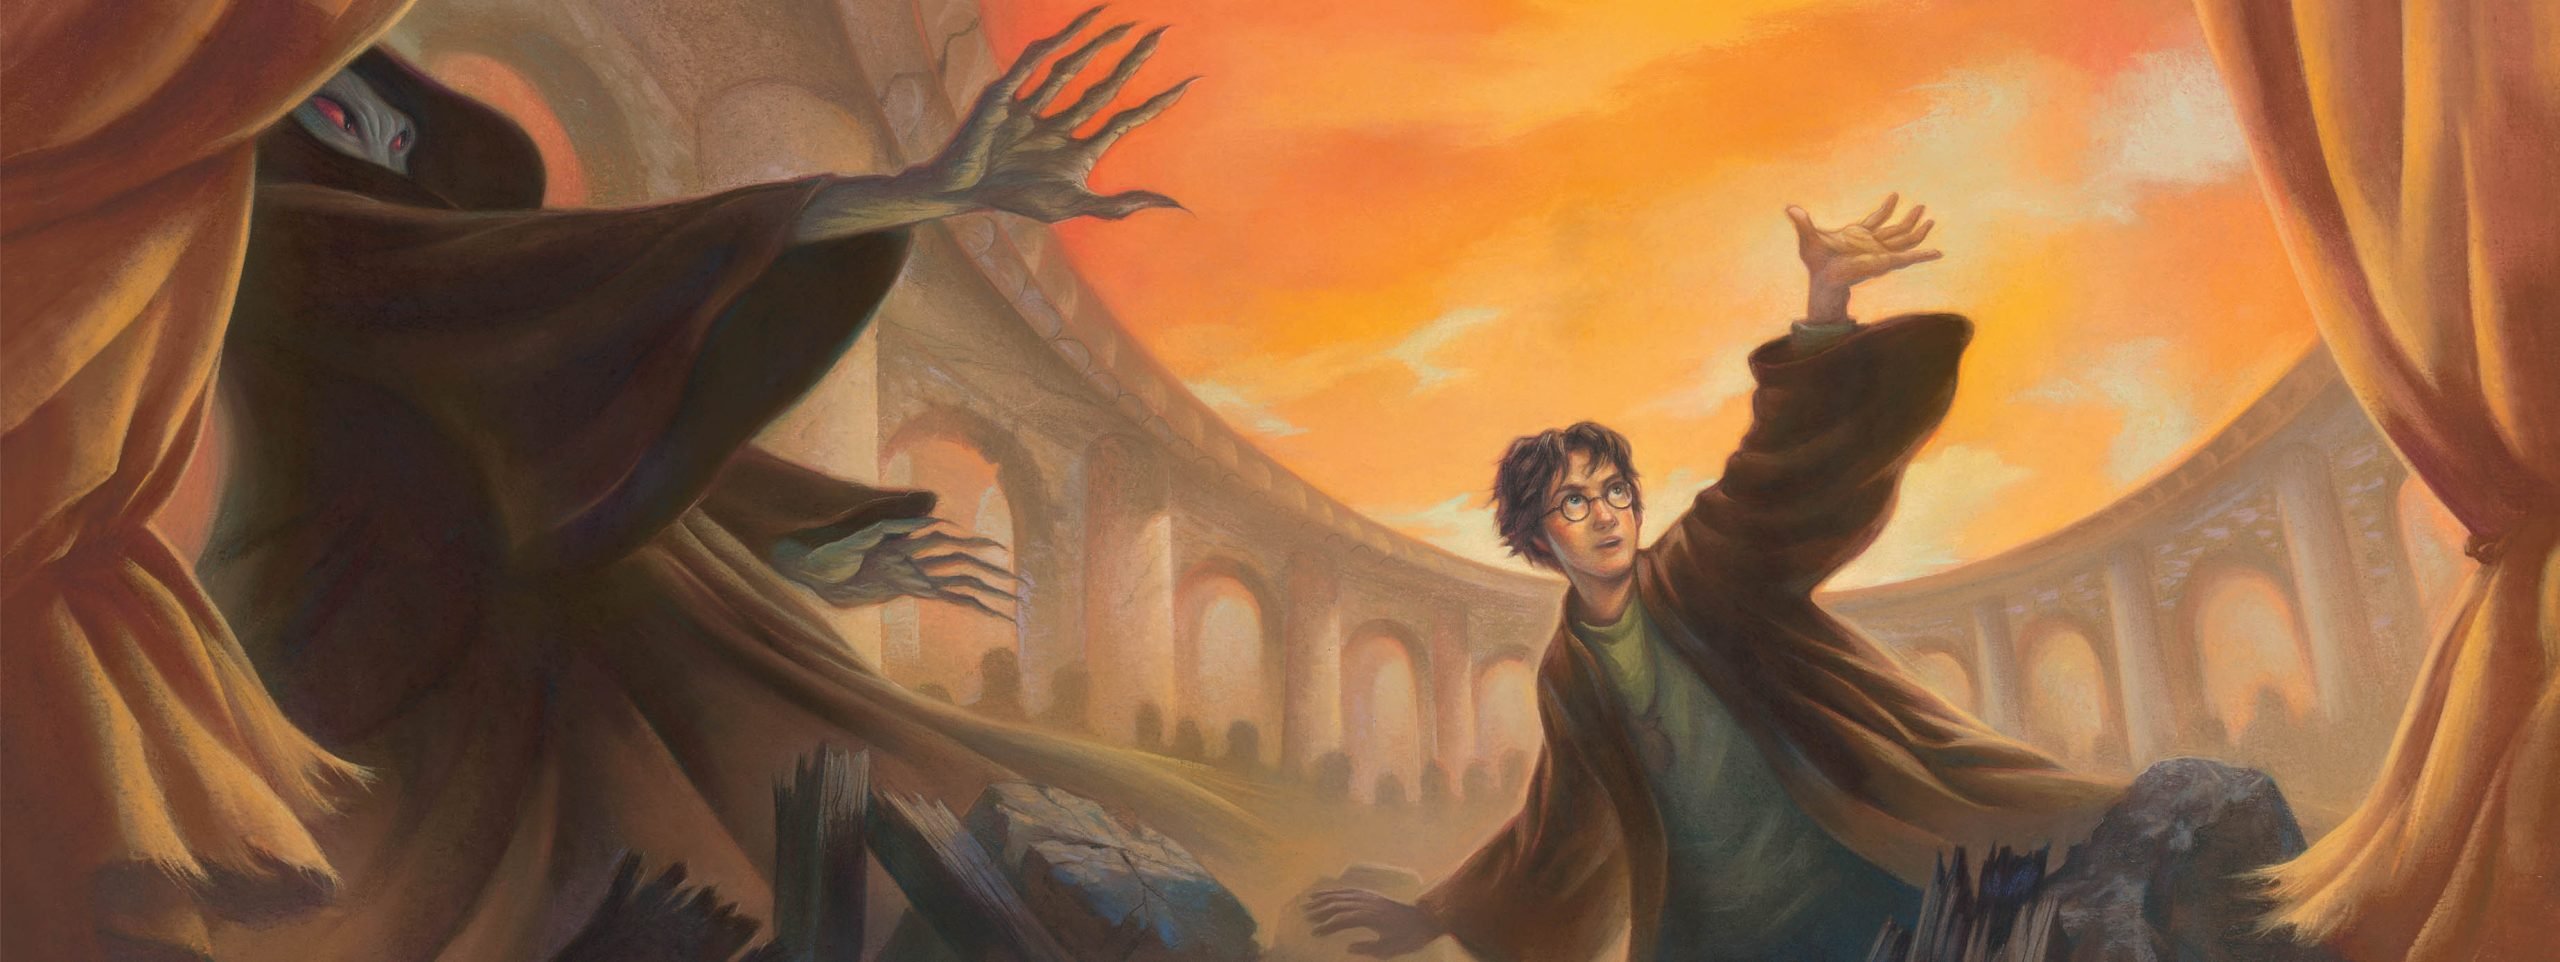 Harry Potter and the Deathly Hallows US Cover